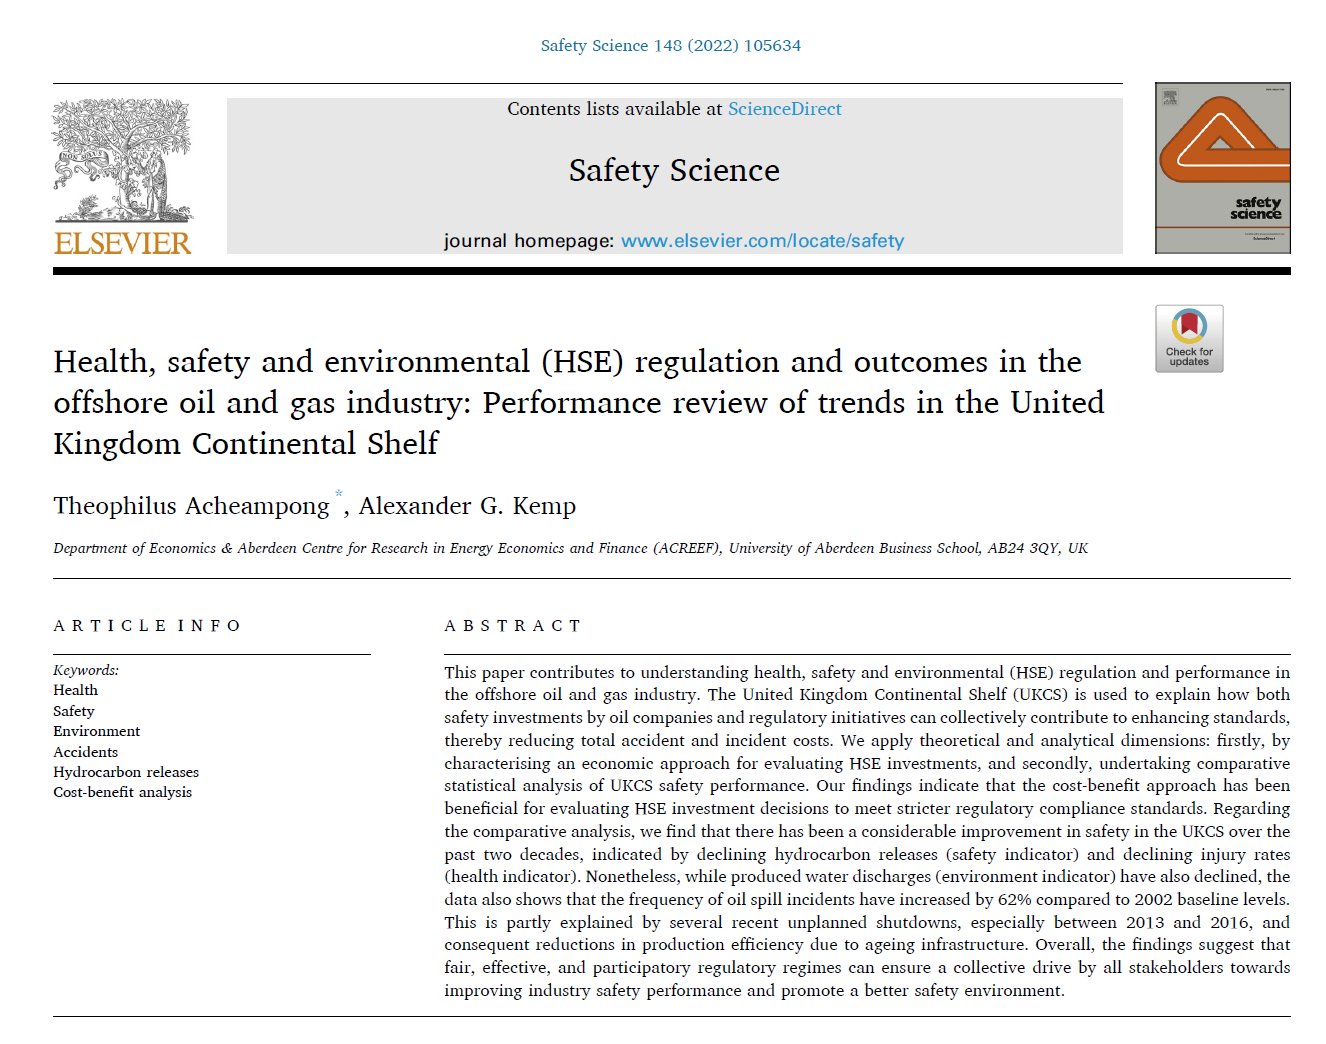 Safety Science, Journal